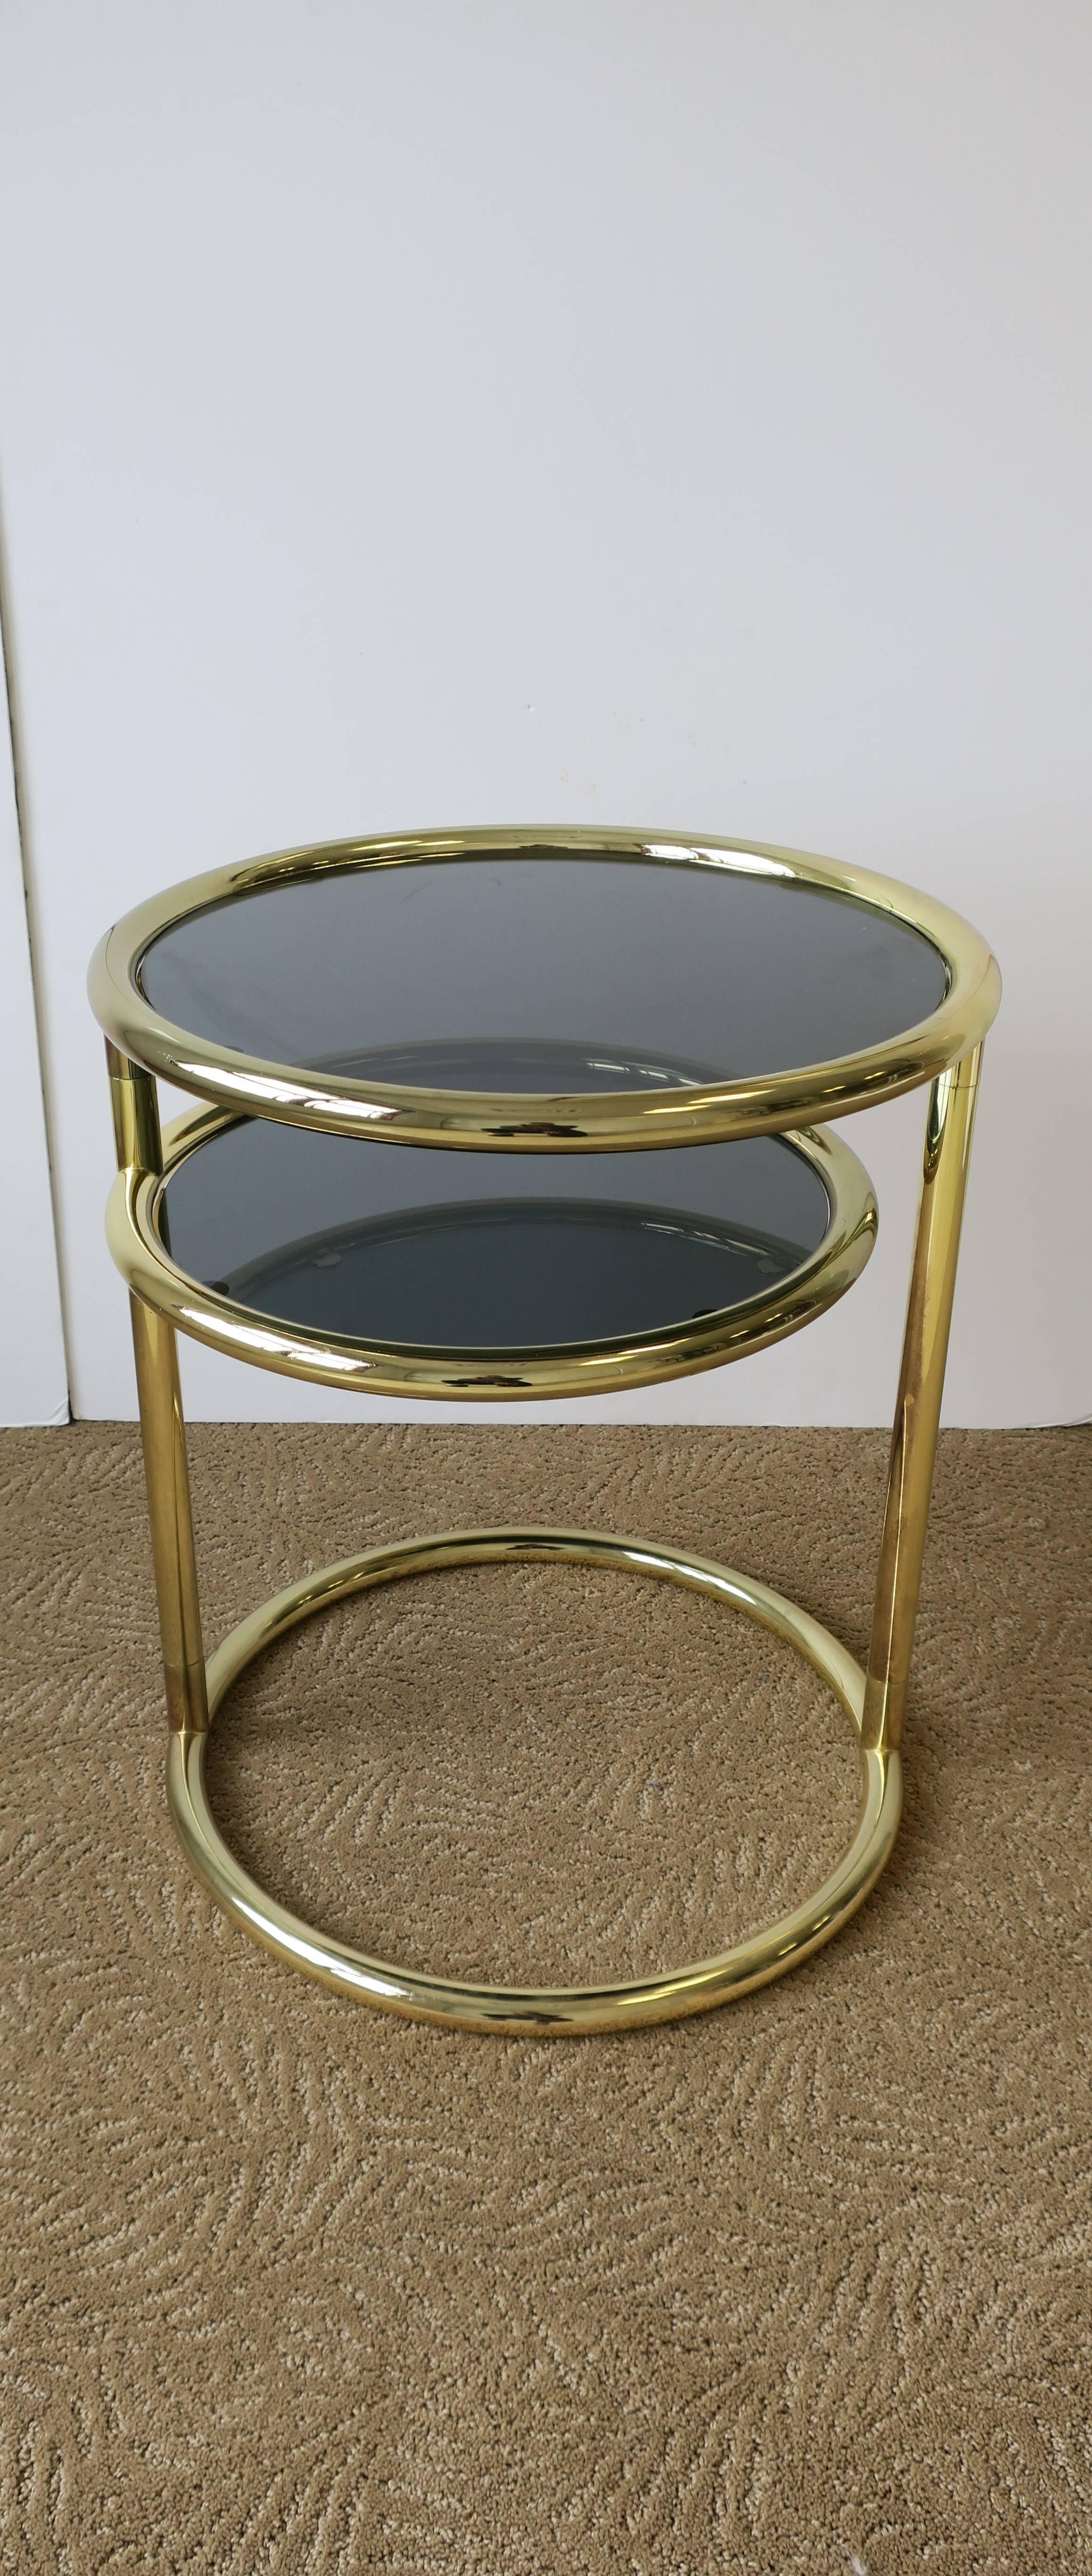 A '70s Modern tubular brass and smoked glass round side table with swivel shelf. Side table has a lower shelf that swivels out, as demonstrated in images. Table is in the style of designer Milo Baughman, circa 1970s. 

Measurements include: 21 in. H